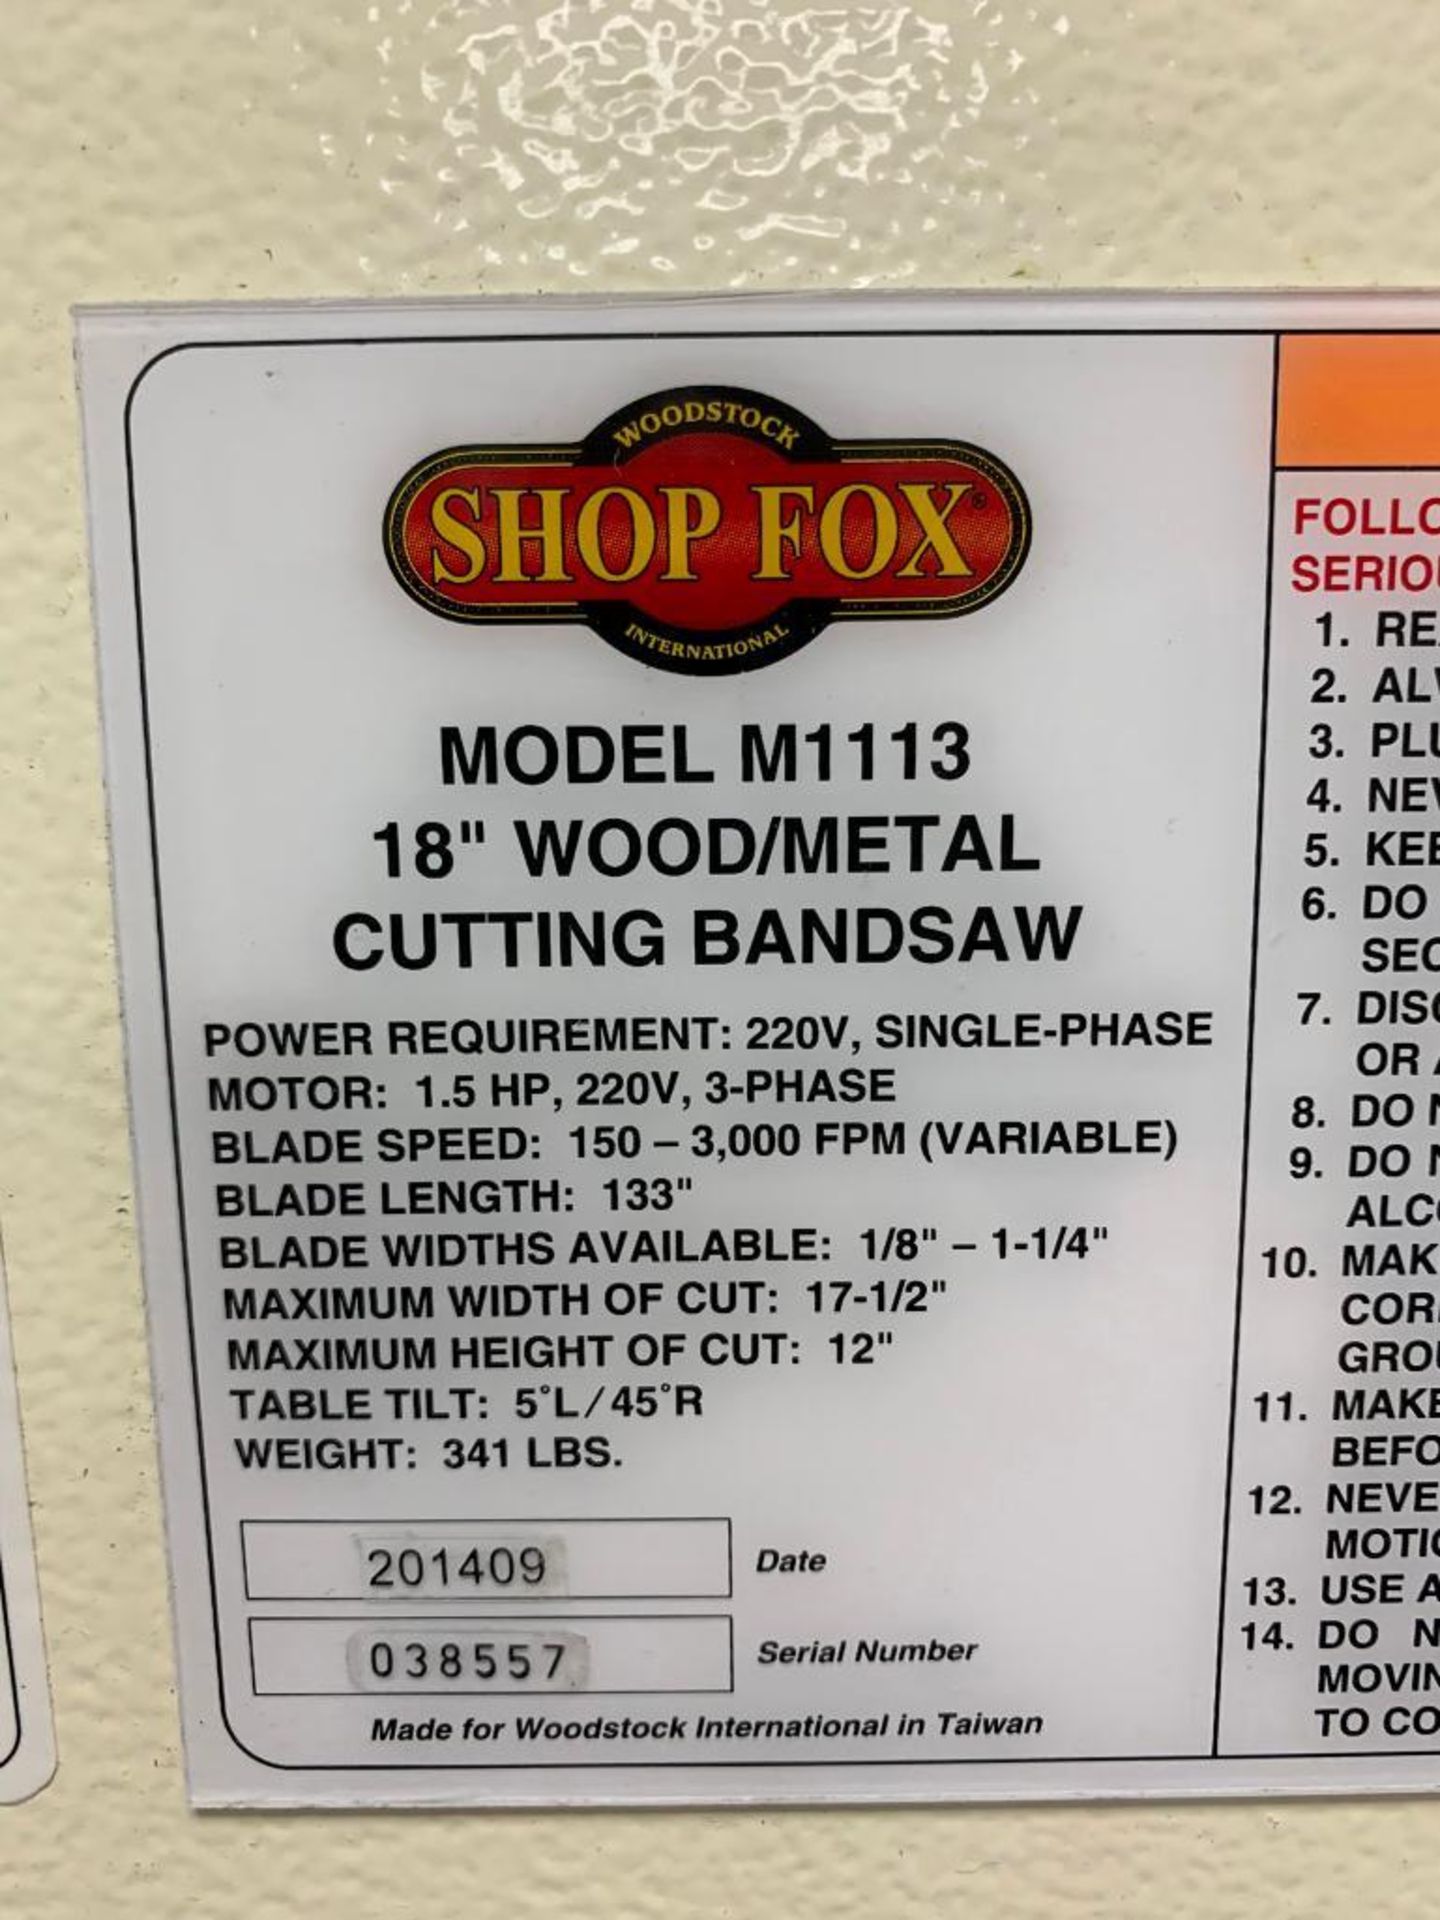 2014 Shop Fox 18" Vertical Band Saw, Model M1113, Band Welder, 220 V, Single Phase, Max. Ht. 12", Ma - Image 5 of 5